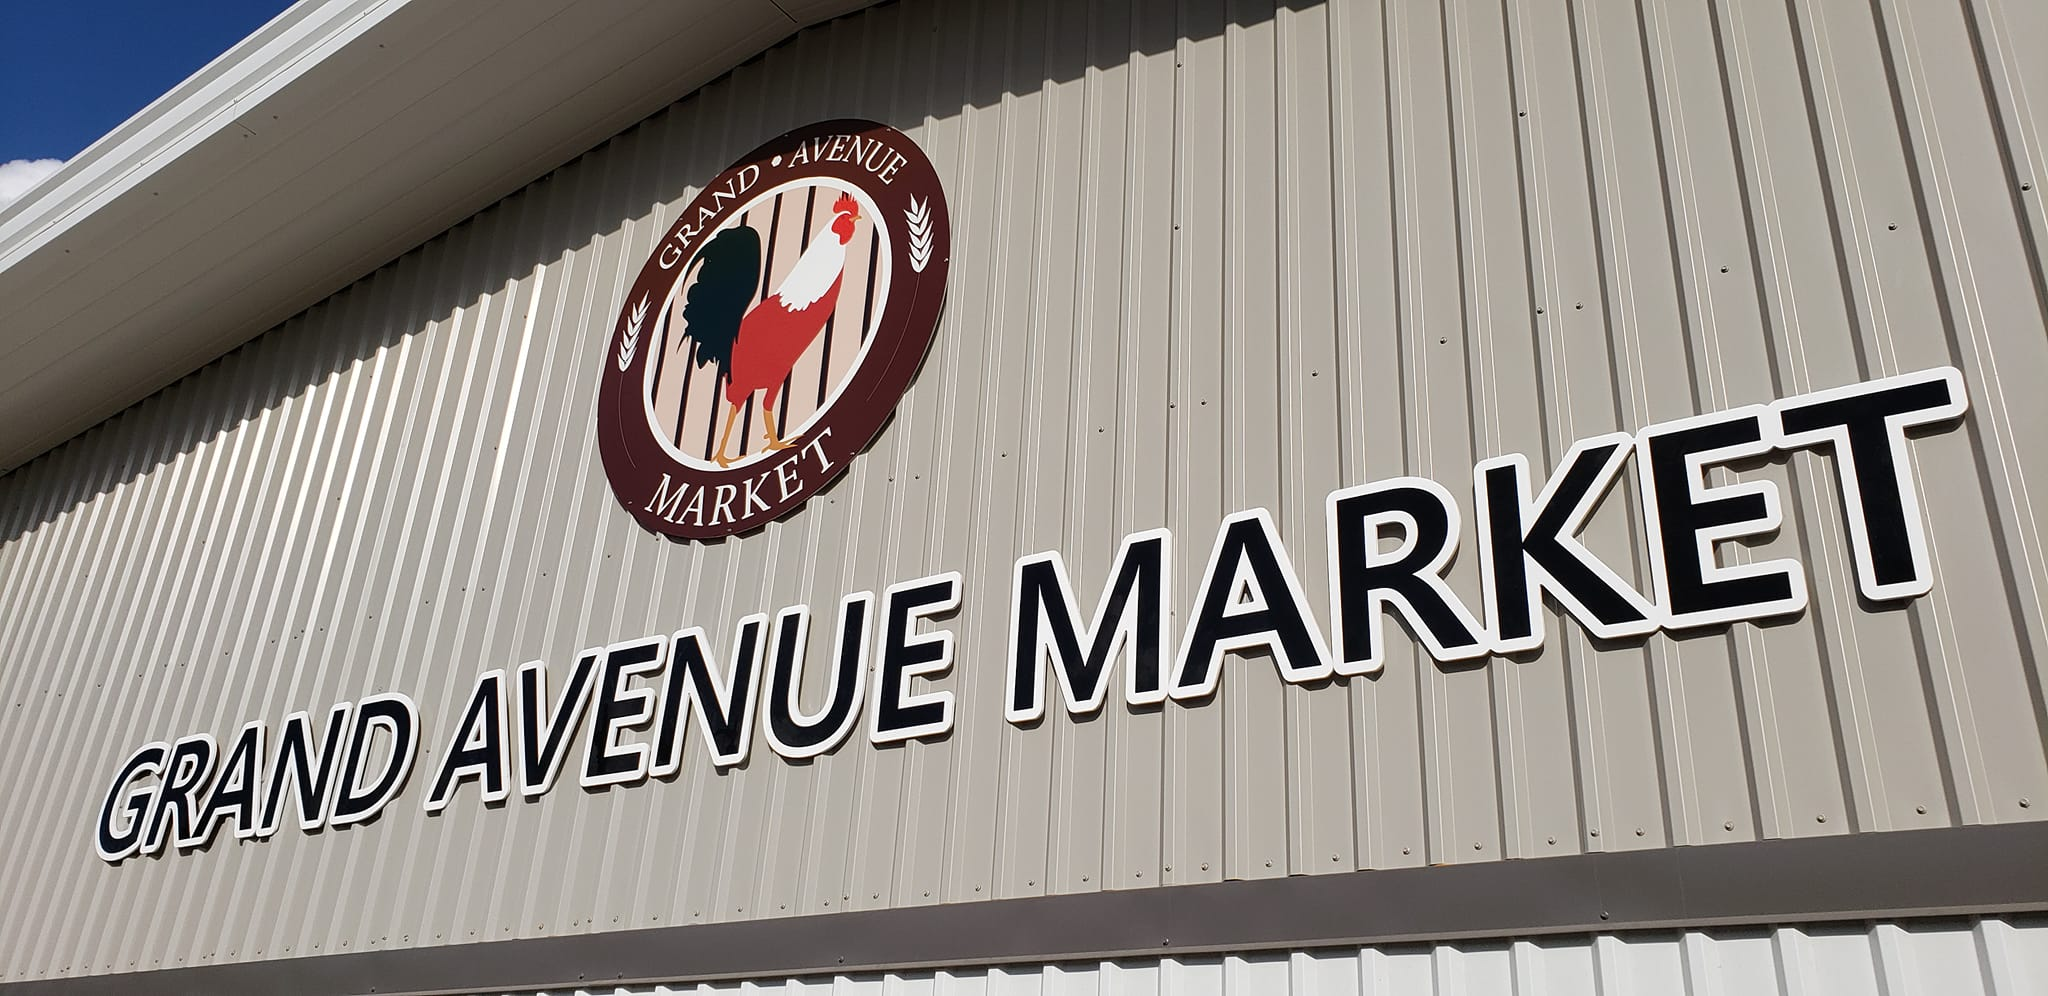 Grand Avenue Market: A 20-Year Quest to Re-establish a Local Grocery Store in Rural Kansas